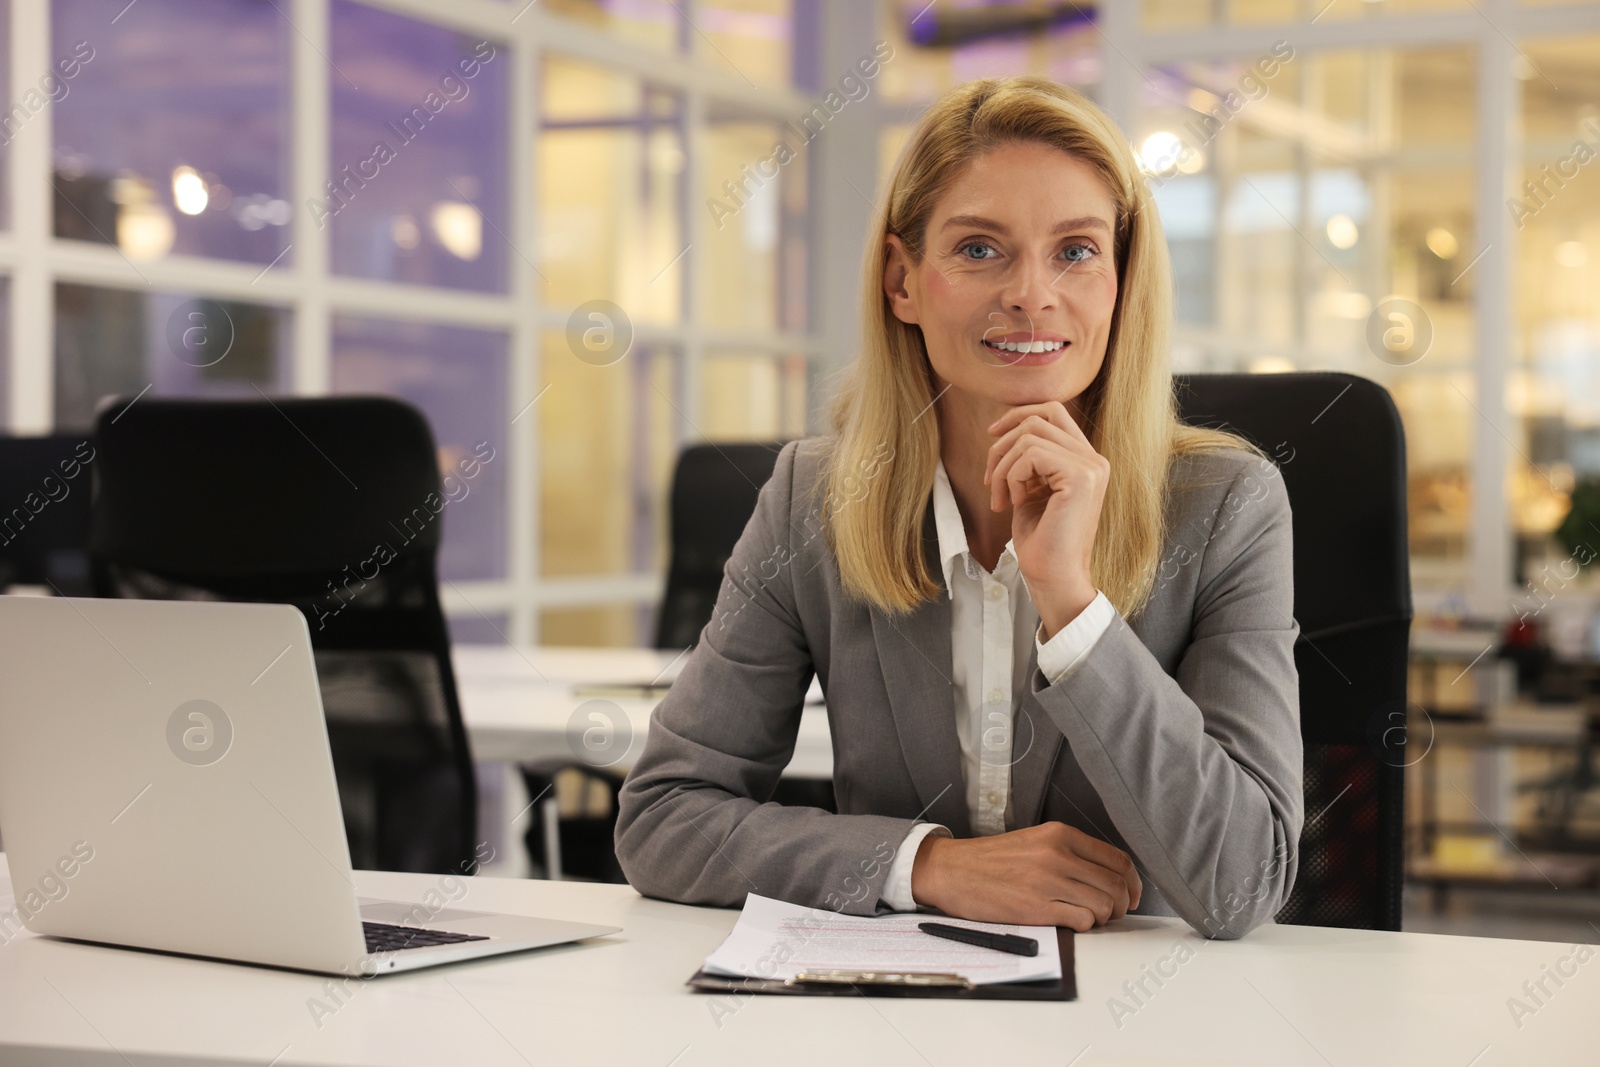 Photo of Smiling woman working at table in office. Lawyer, businesswoman, accountant or manager